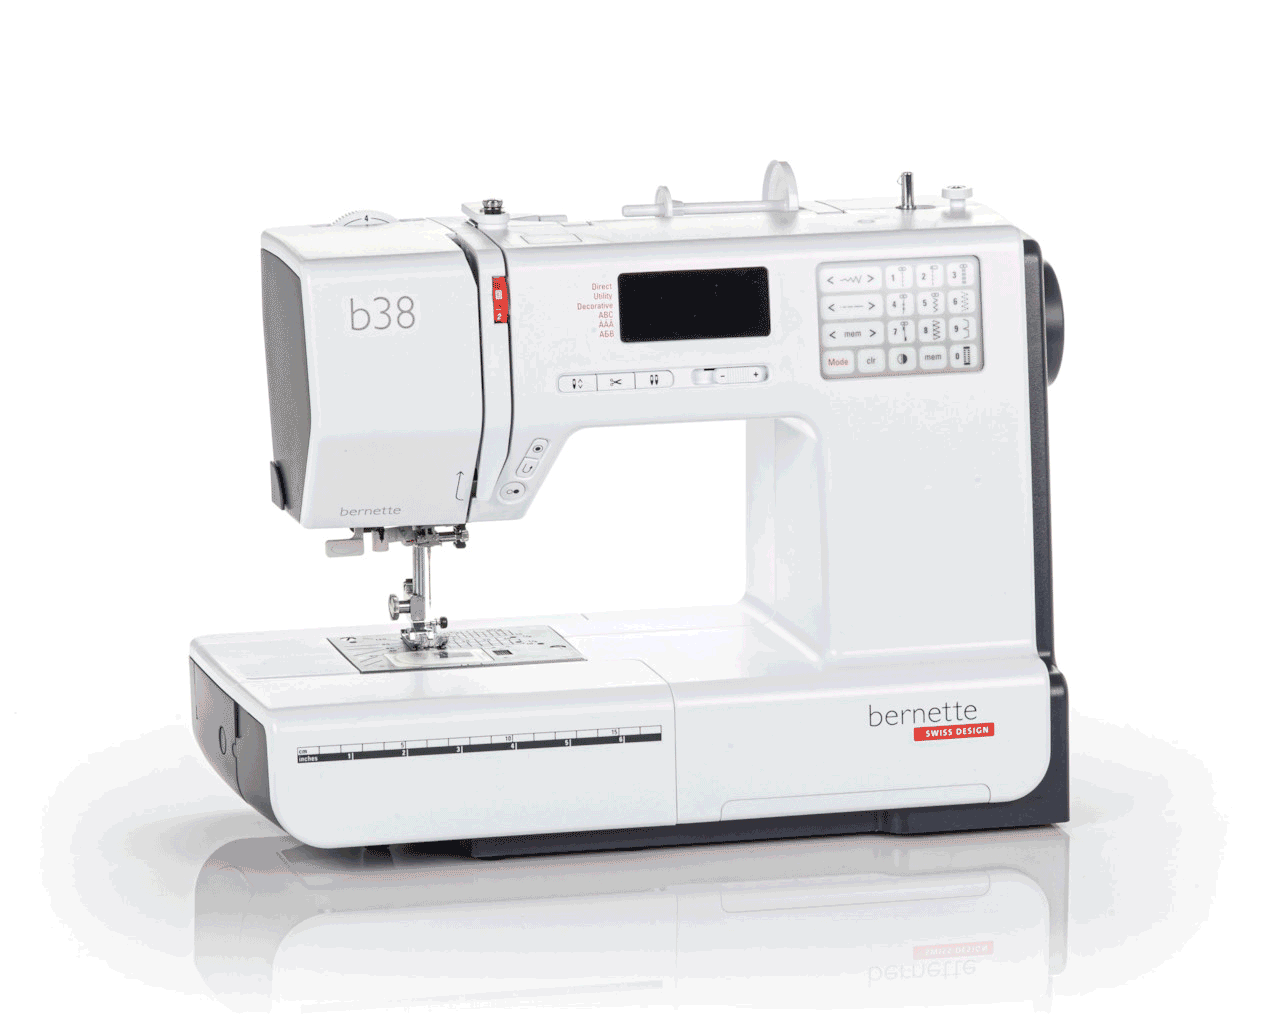 Bernette b38 Sewing Machine for Sale at World Weidner